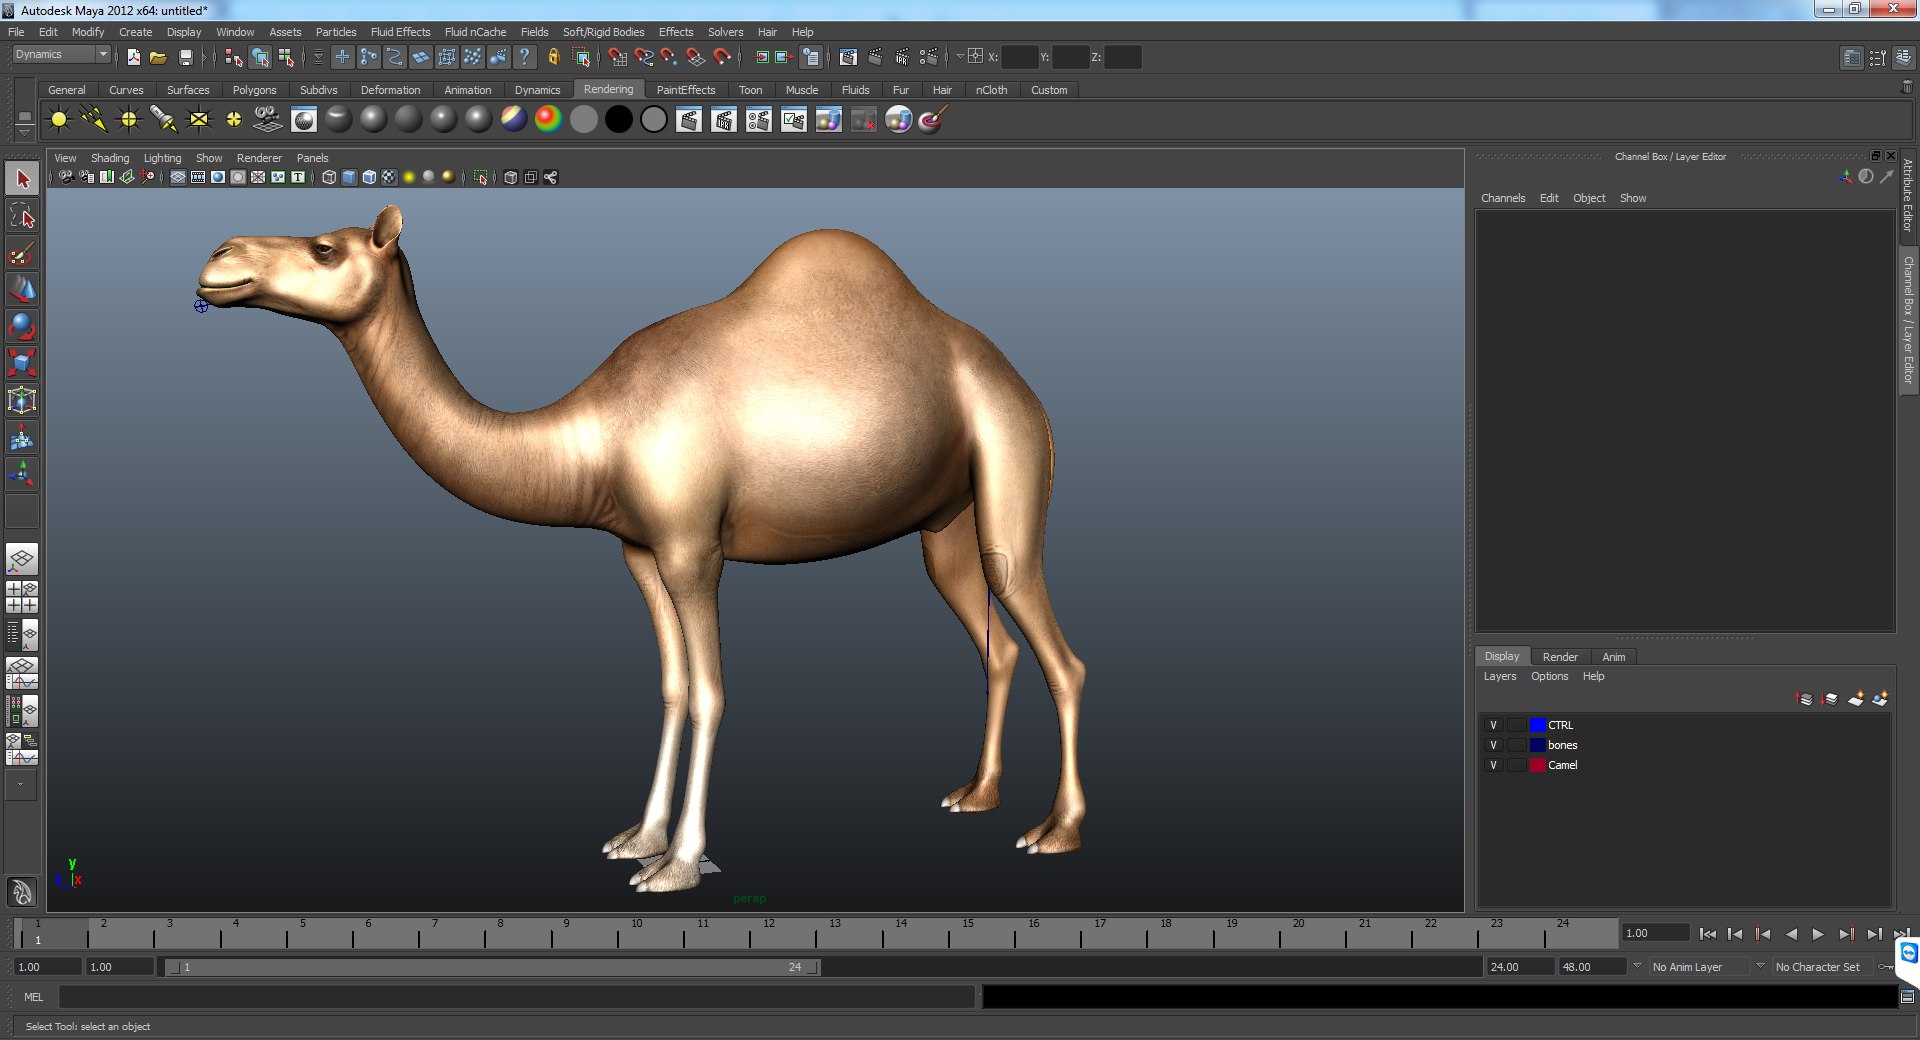 camel rigged 3d ma